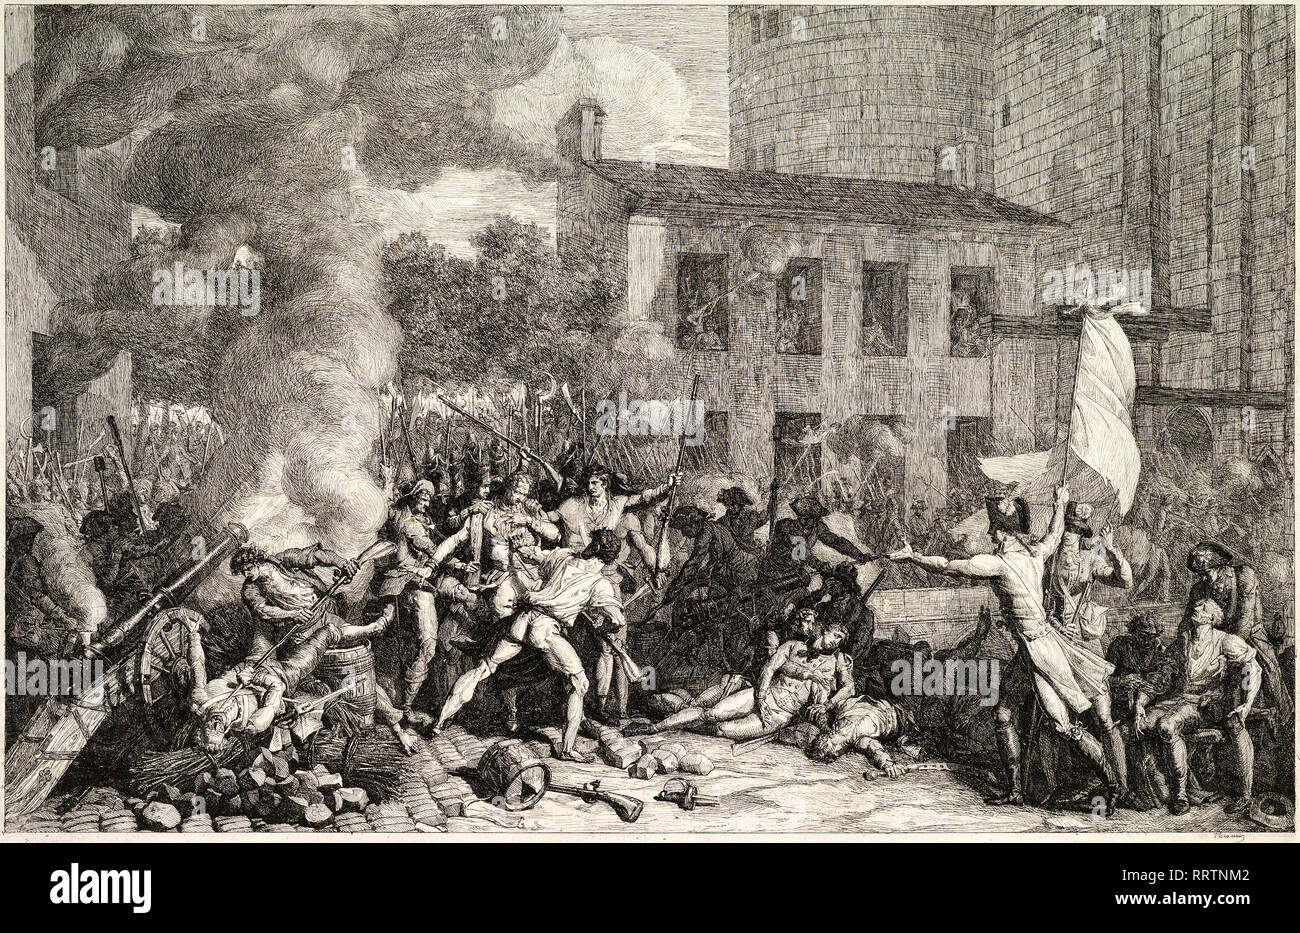 Charles Thevenin, The Storming of the Bastille on 14 July 1789, etching circa 1793, French revolution print Stock Photo